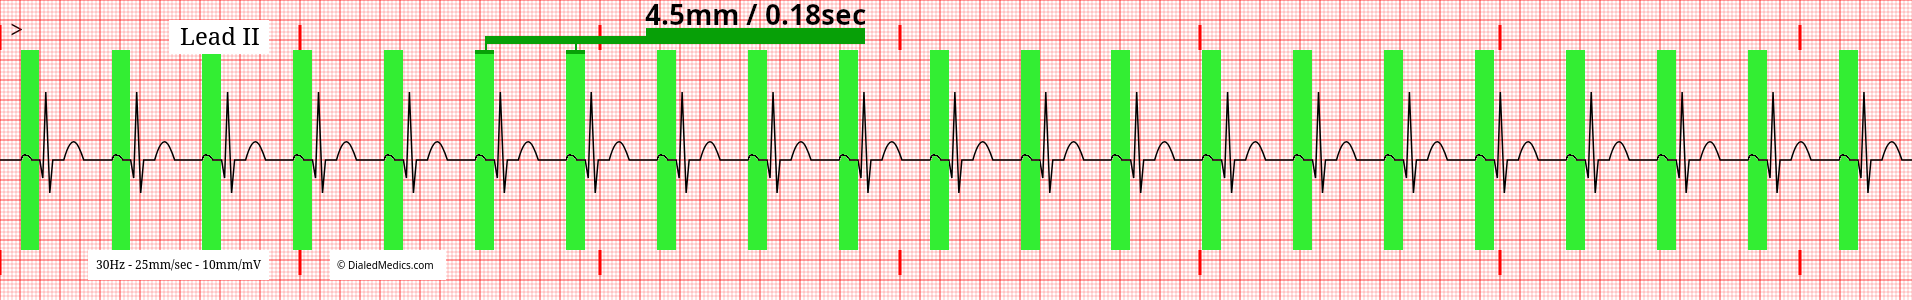 ECG tracing of a Normal Sinus Rhythm with a HR of 66 and P-R Intervals marked.